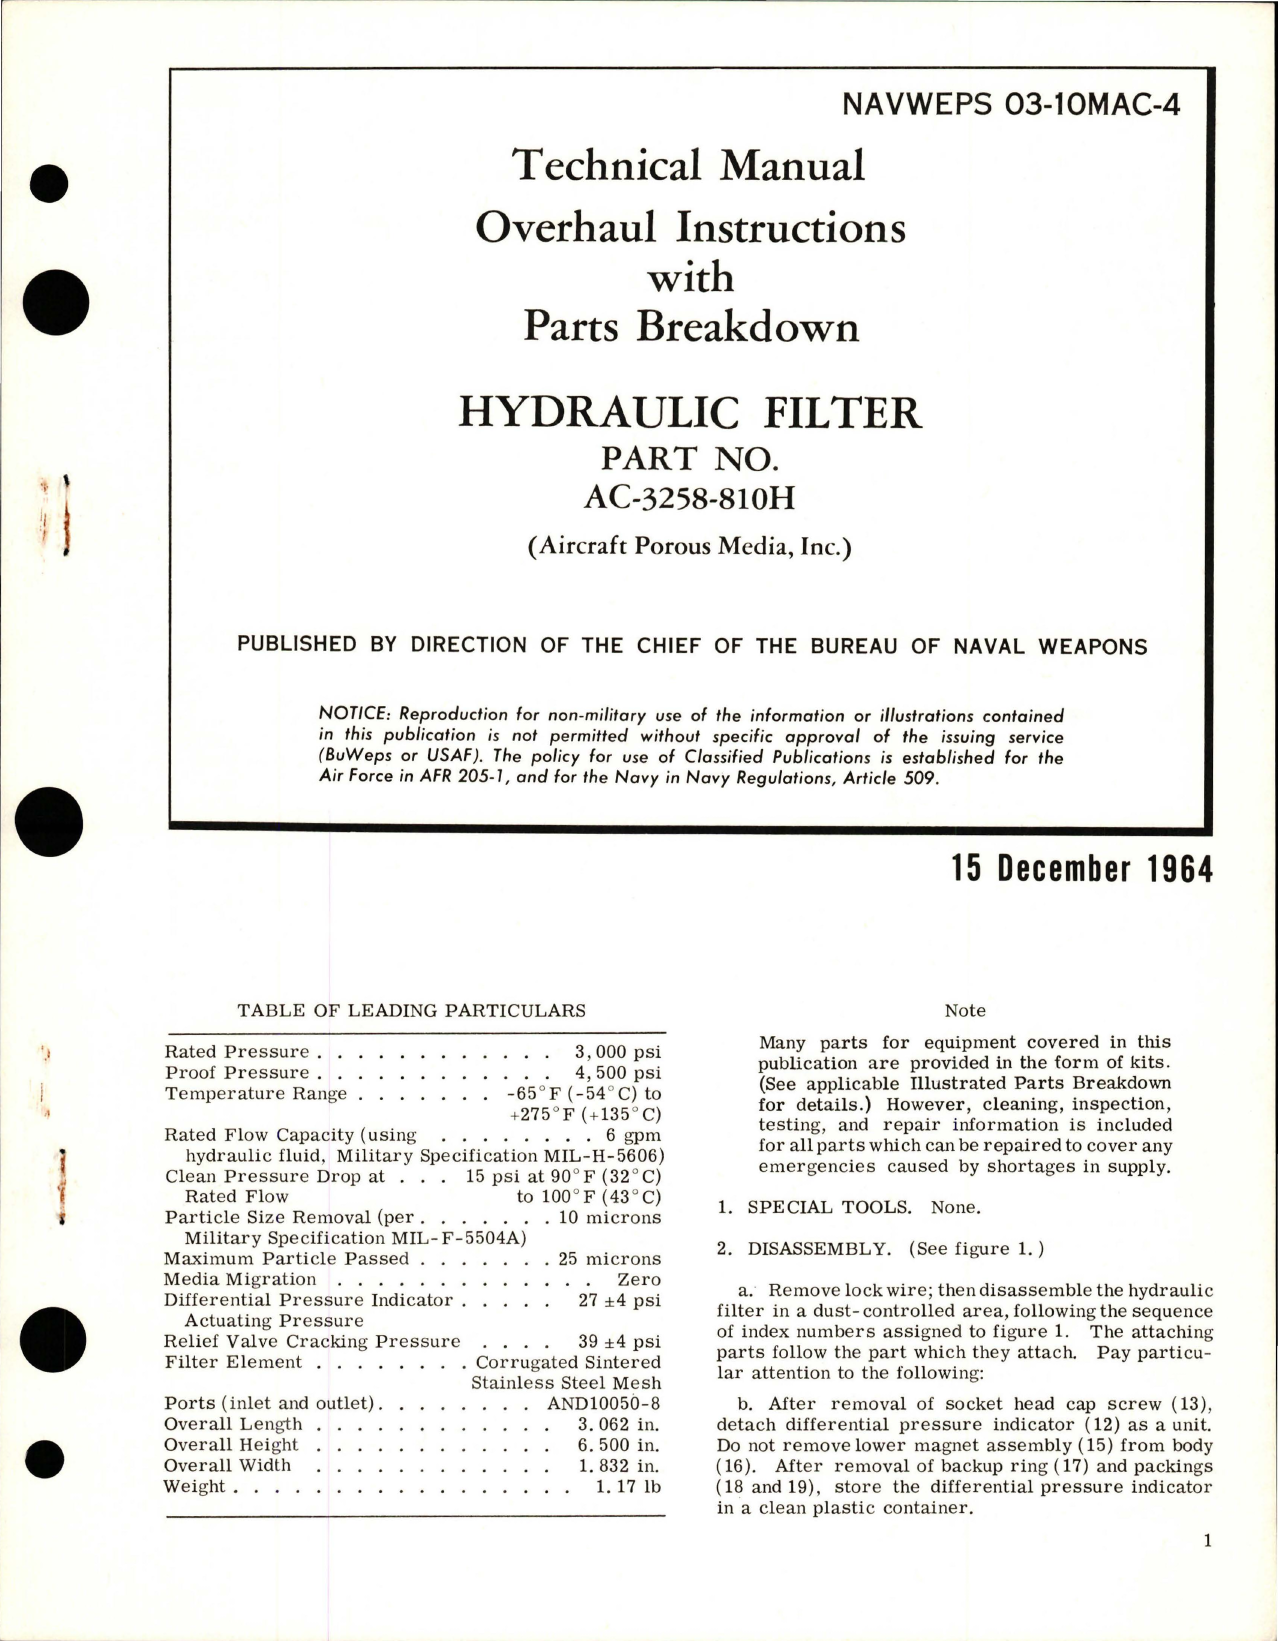 Sample page 1 from AirCorps Library document: Overhaul Instructions with Parts Breakdown for Hydraulic Filter - Part AC-3258-810H 